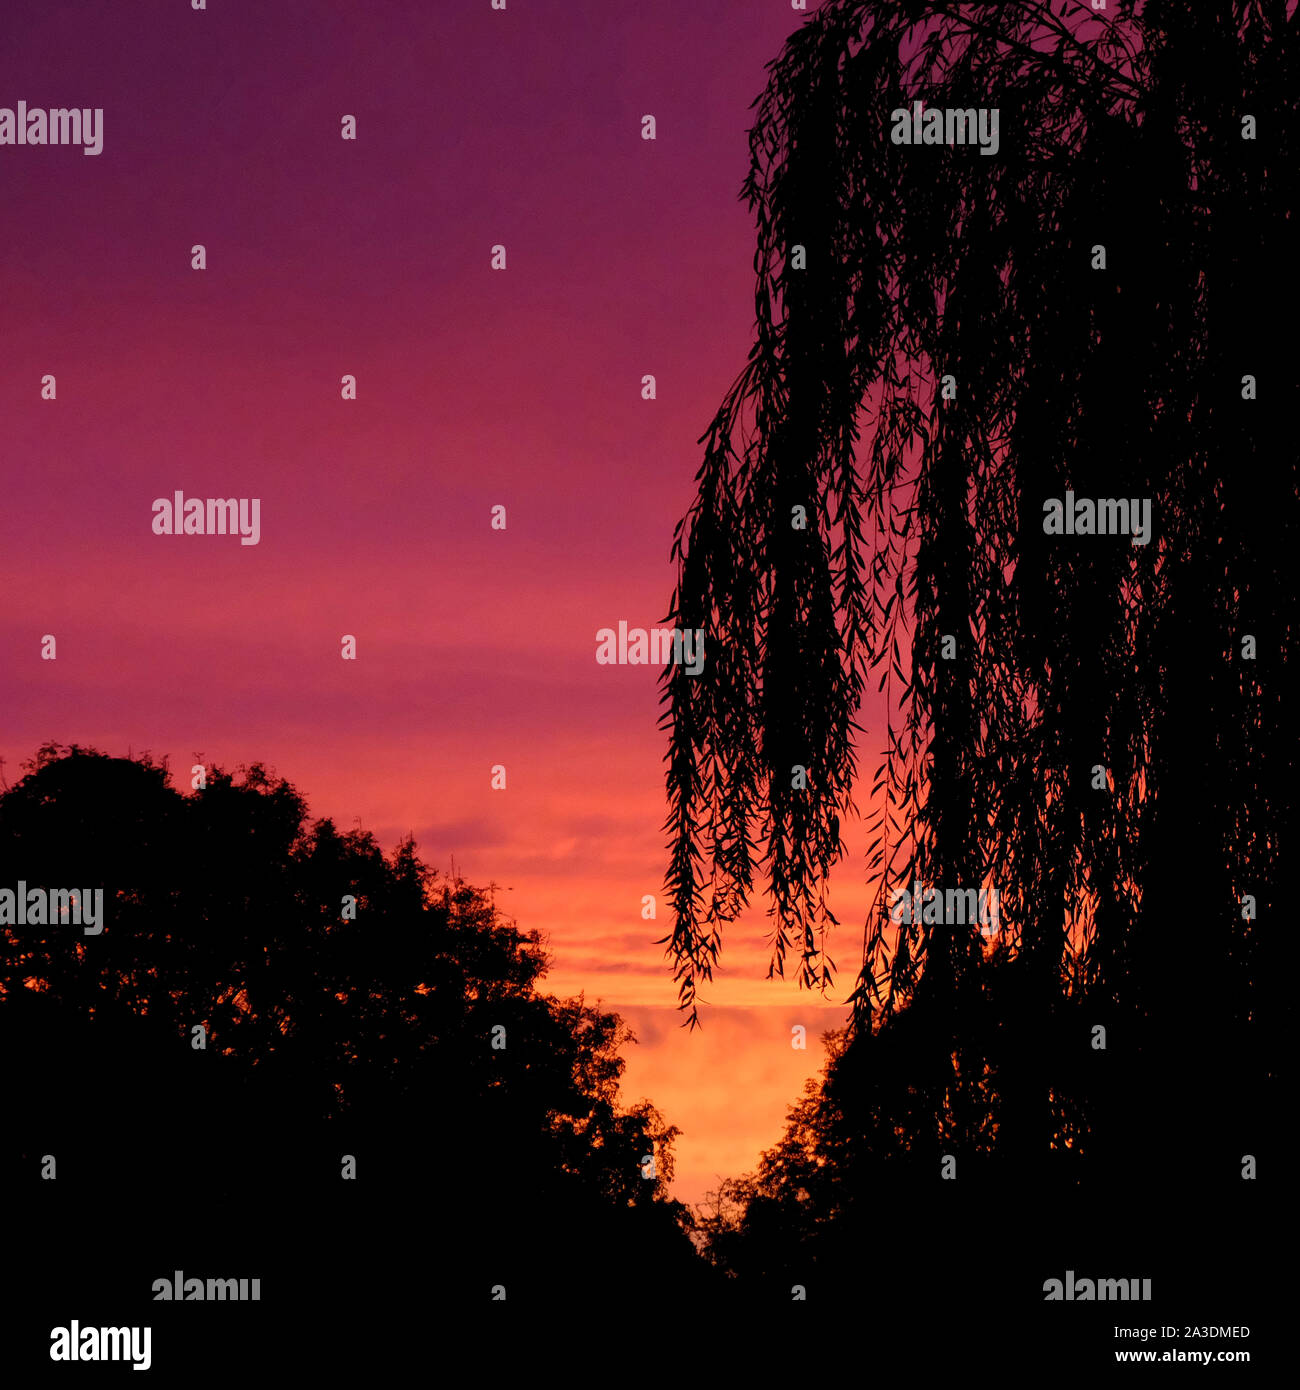 England, West Sussex. Branches of Weeping Willow tree silhouetted against a colourful autumnal sky at sunrise Stock Photo